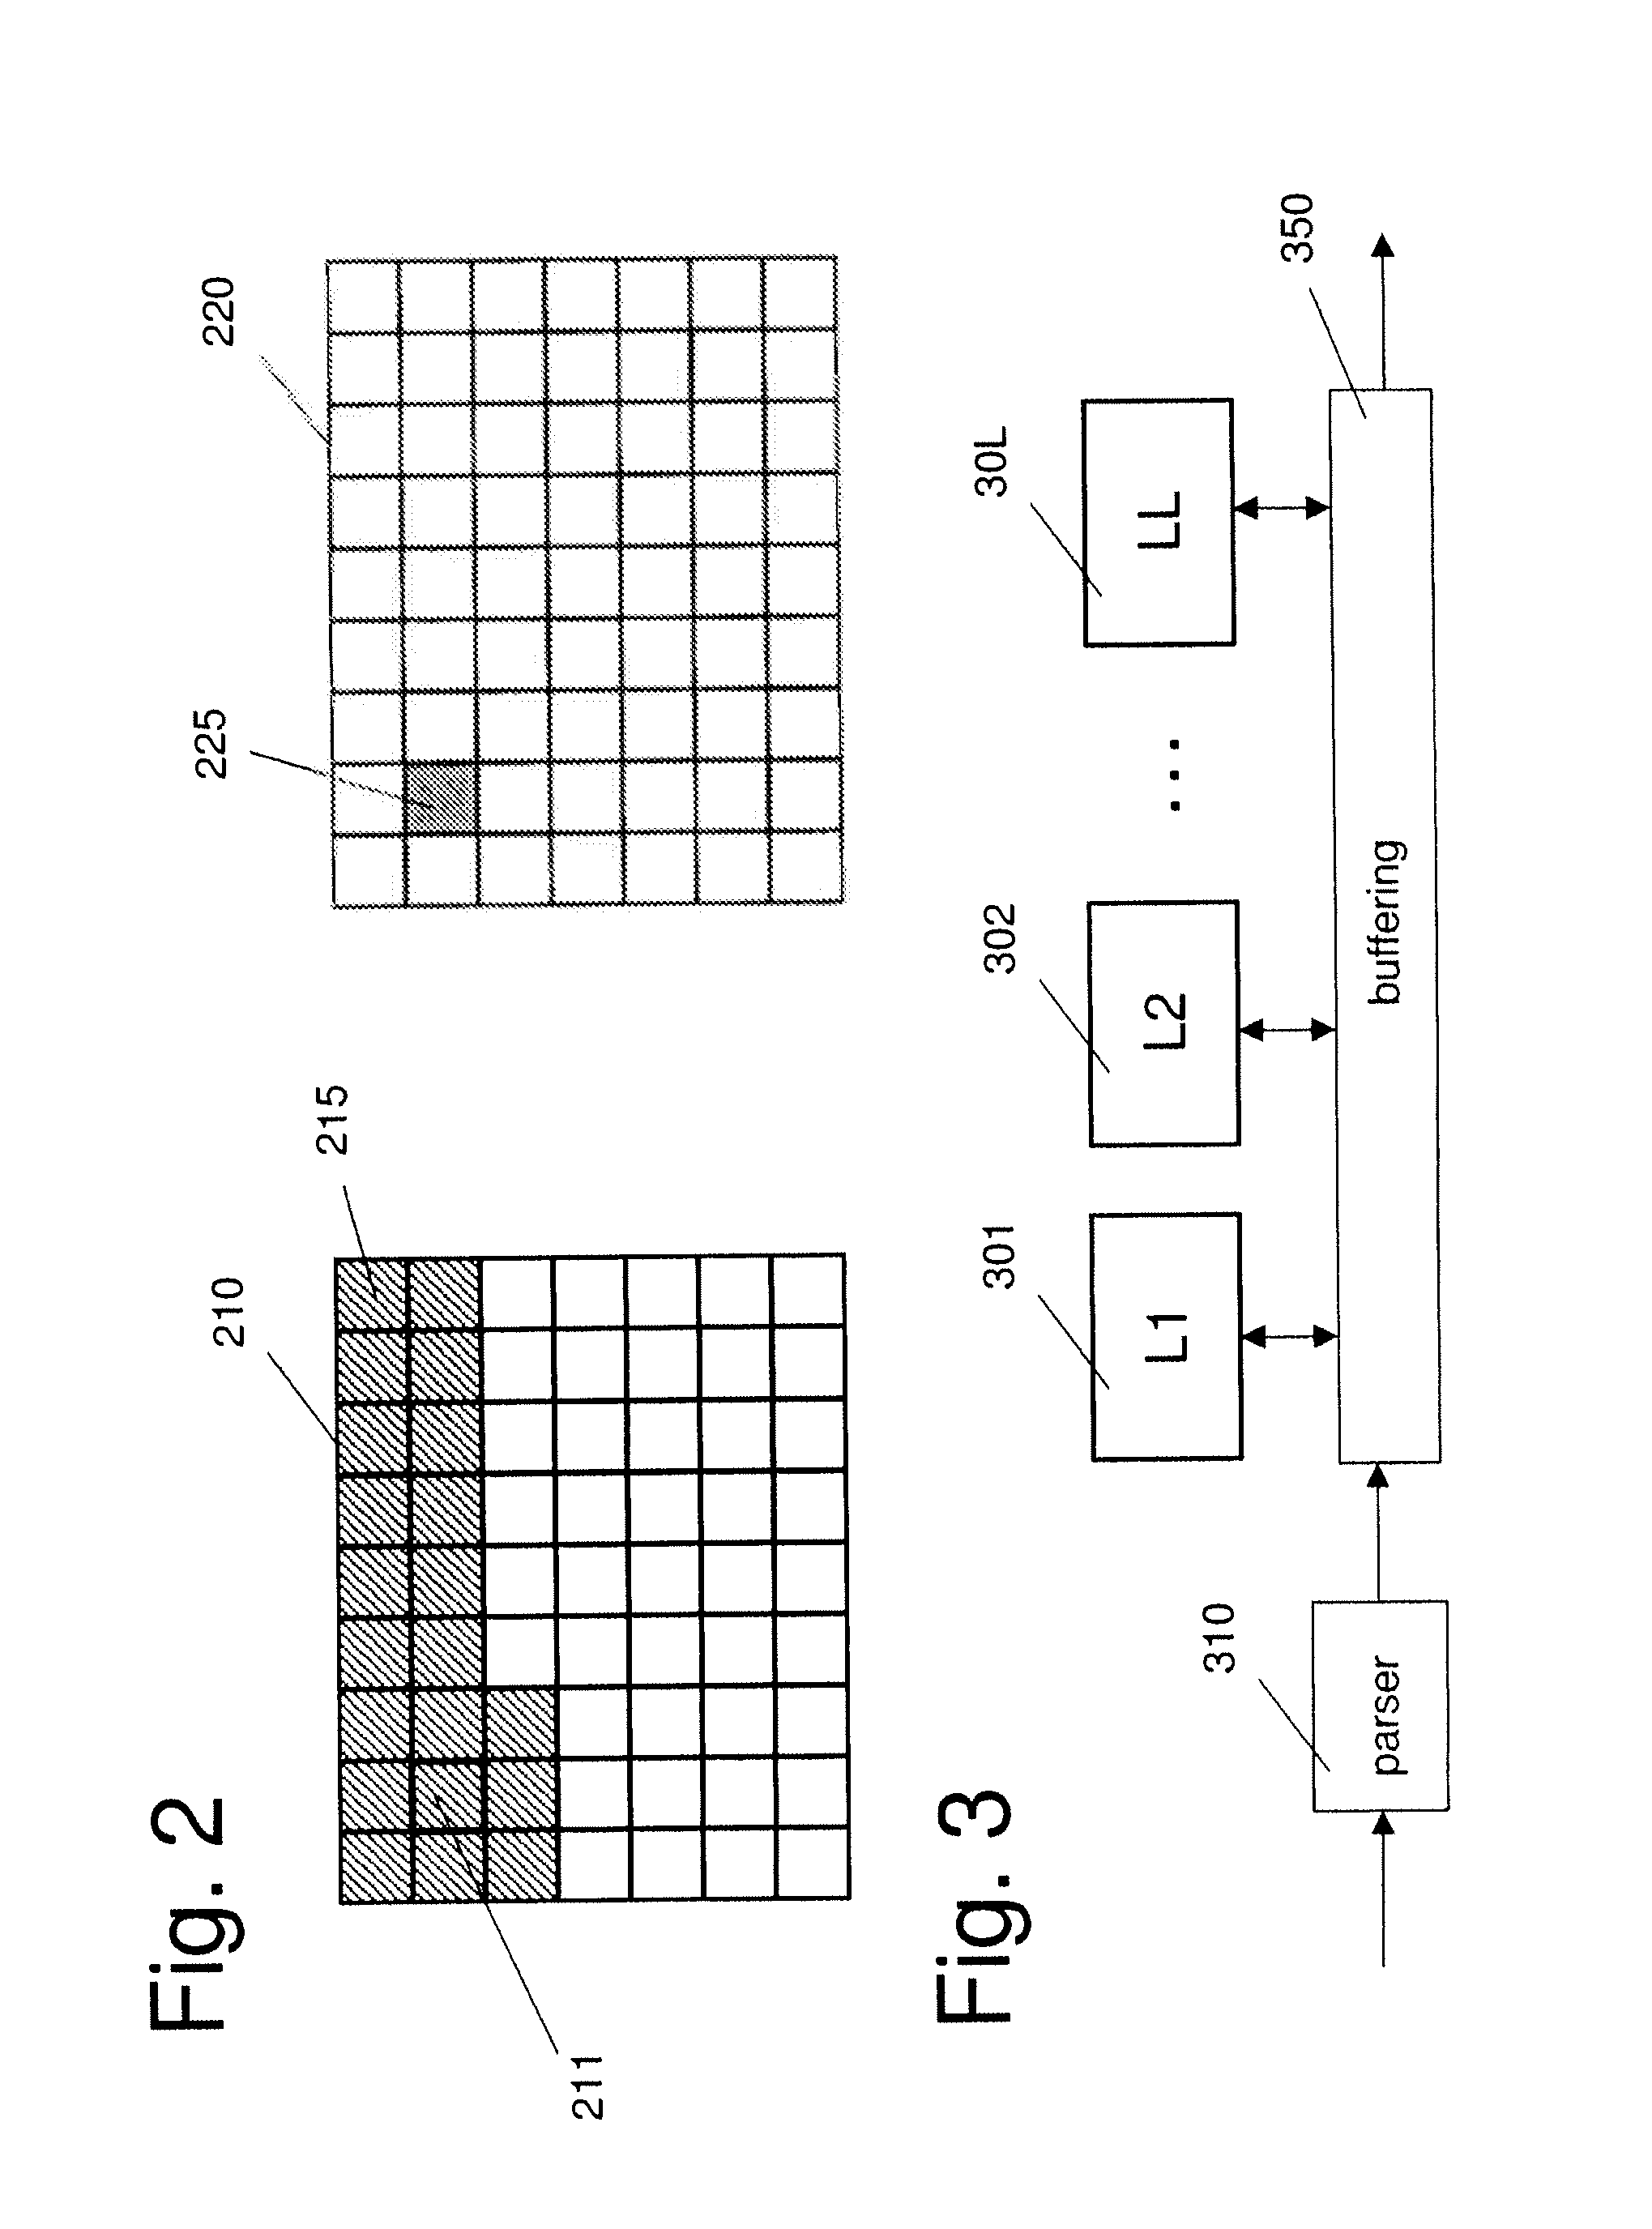 Parallel decoding for scalable video coding